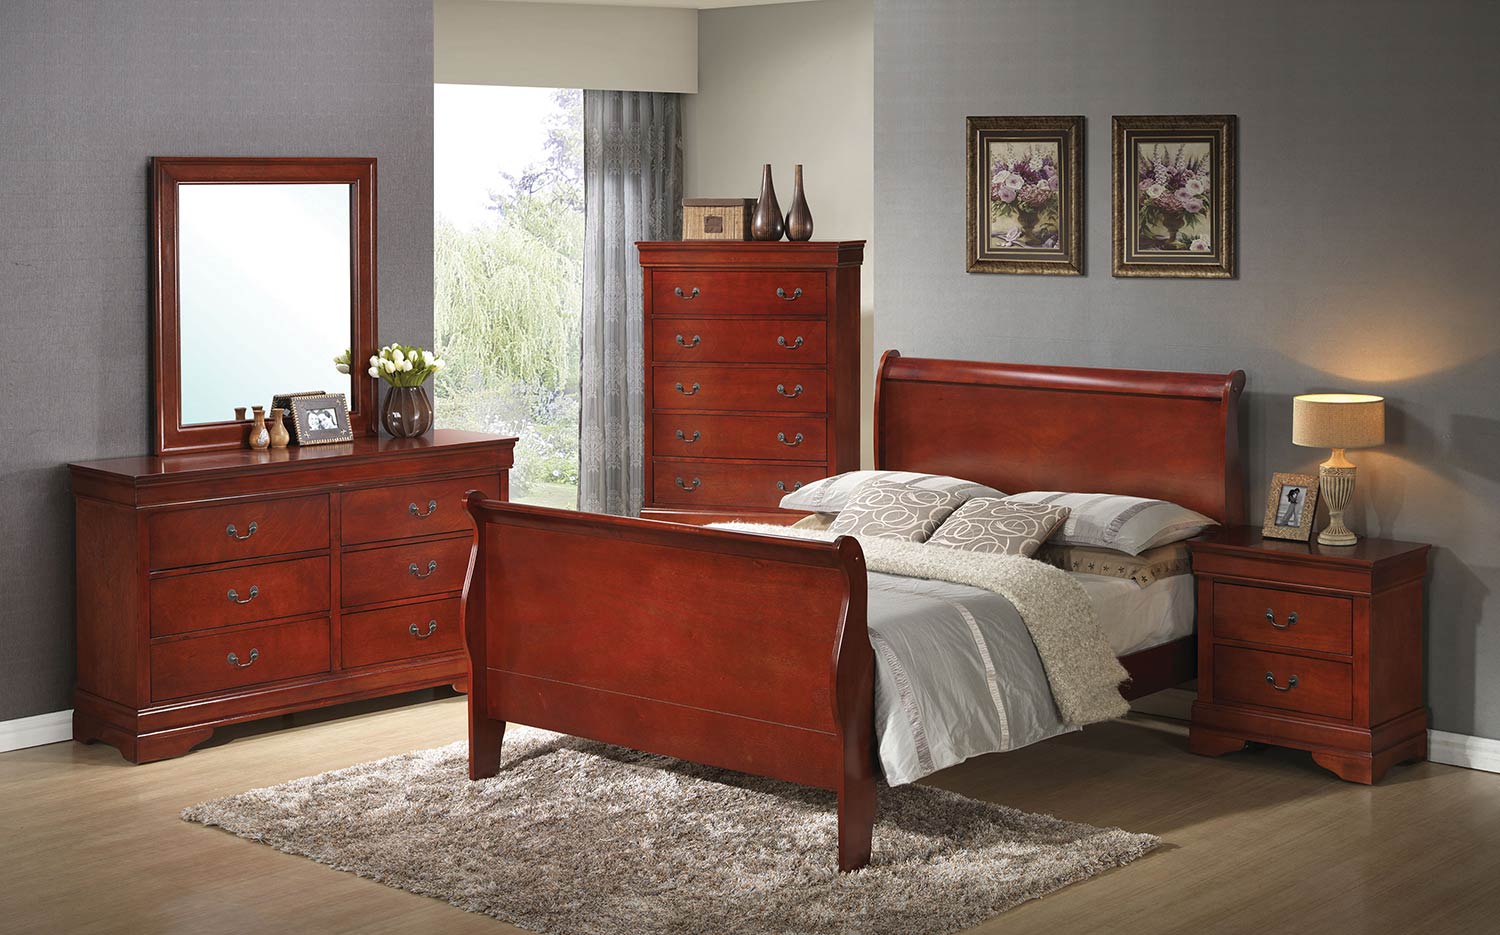 Coaster Louis Philippe Sleigh Bedroom Set - Red Brown 200431-BEDROOM-SET at www.bagssaleusa.com